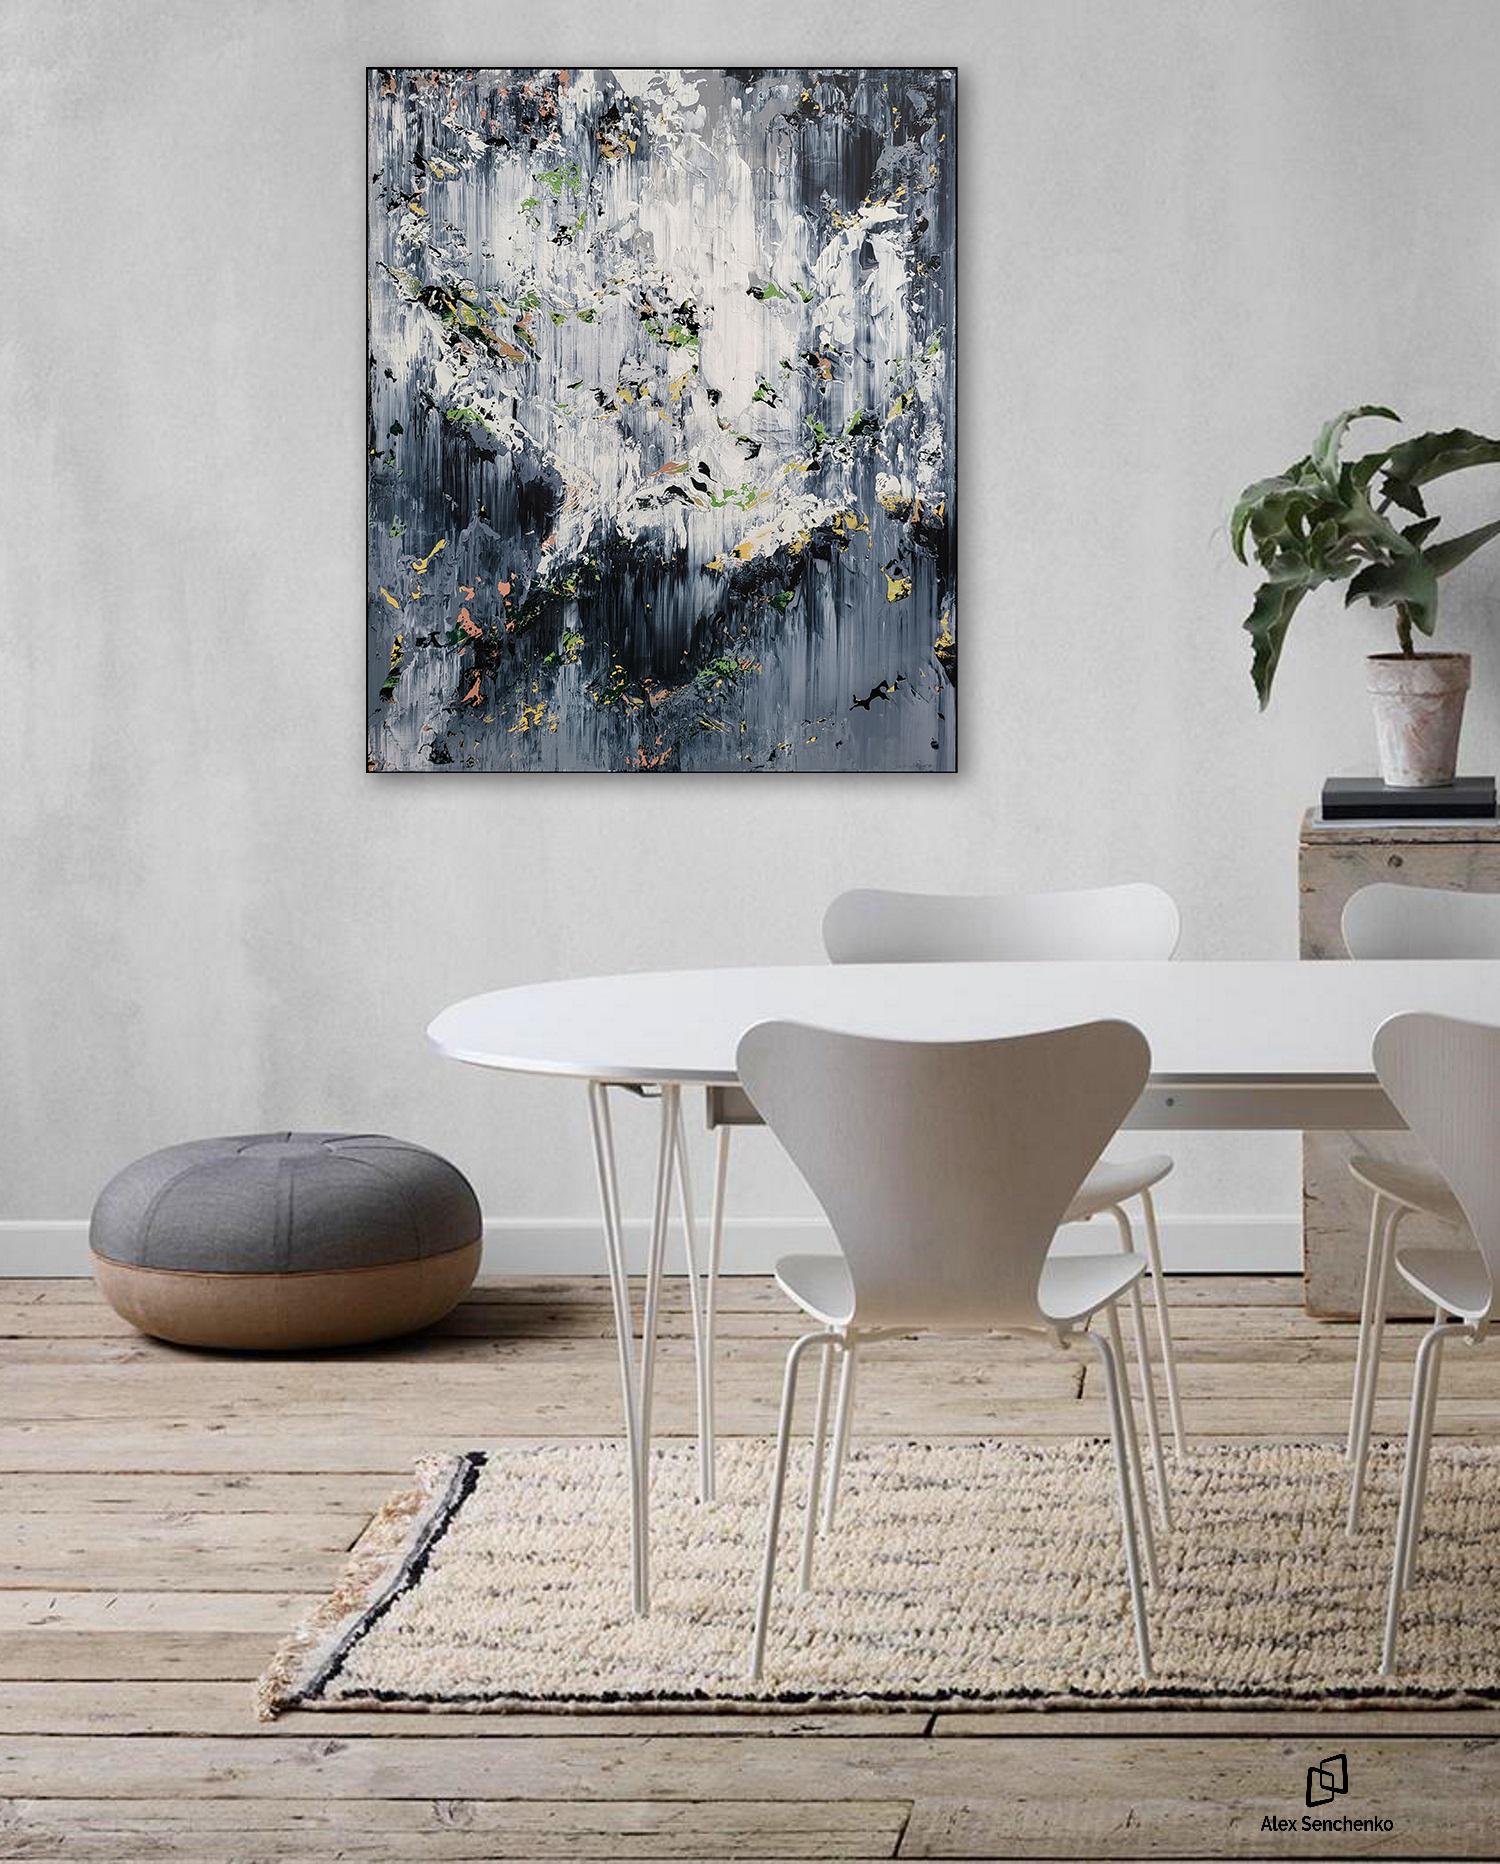 There’s something different about the homes of creative people. They like to surround themselves with inspiring things, from unique tablecloths to the incredible paintings on the walls.
Alex Senchenko’s - Abstract 22131 - can give your home that